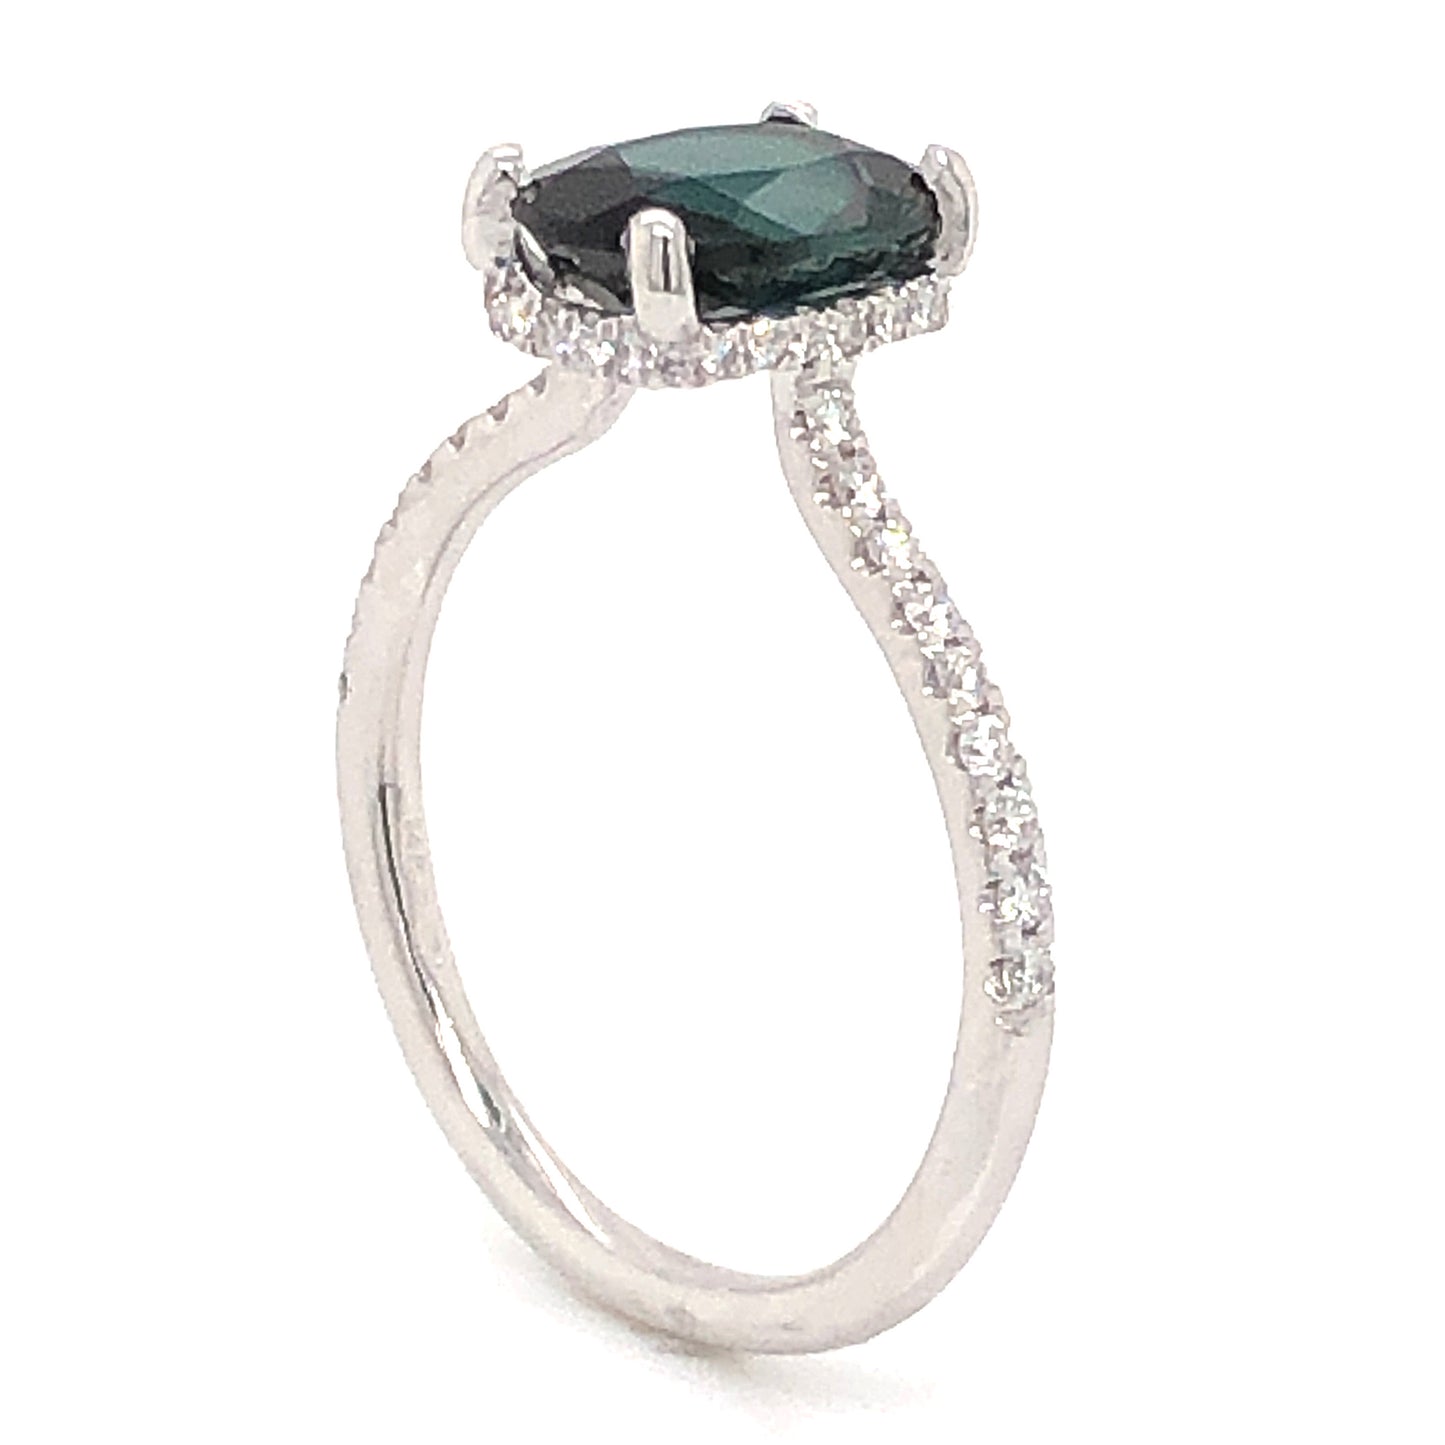 1.54 Oval Cut Tourmaline Engagement Ring in 14k White Gold